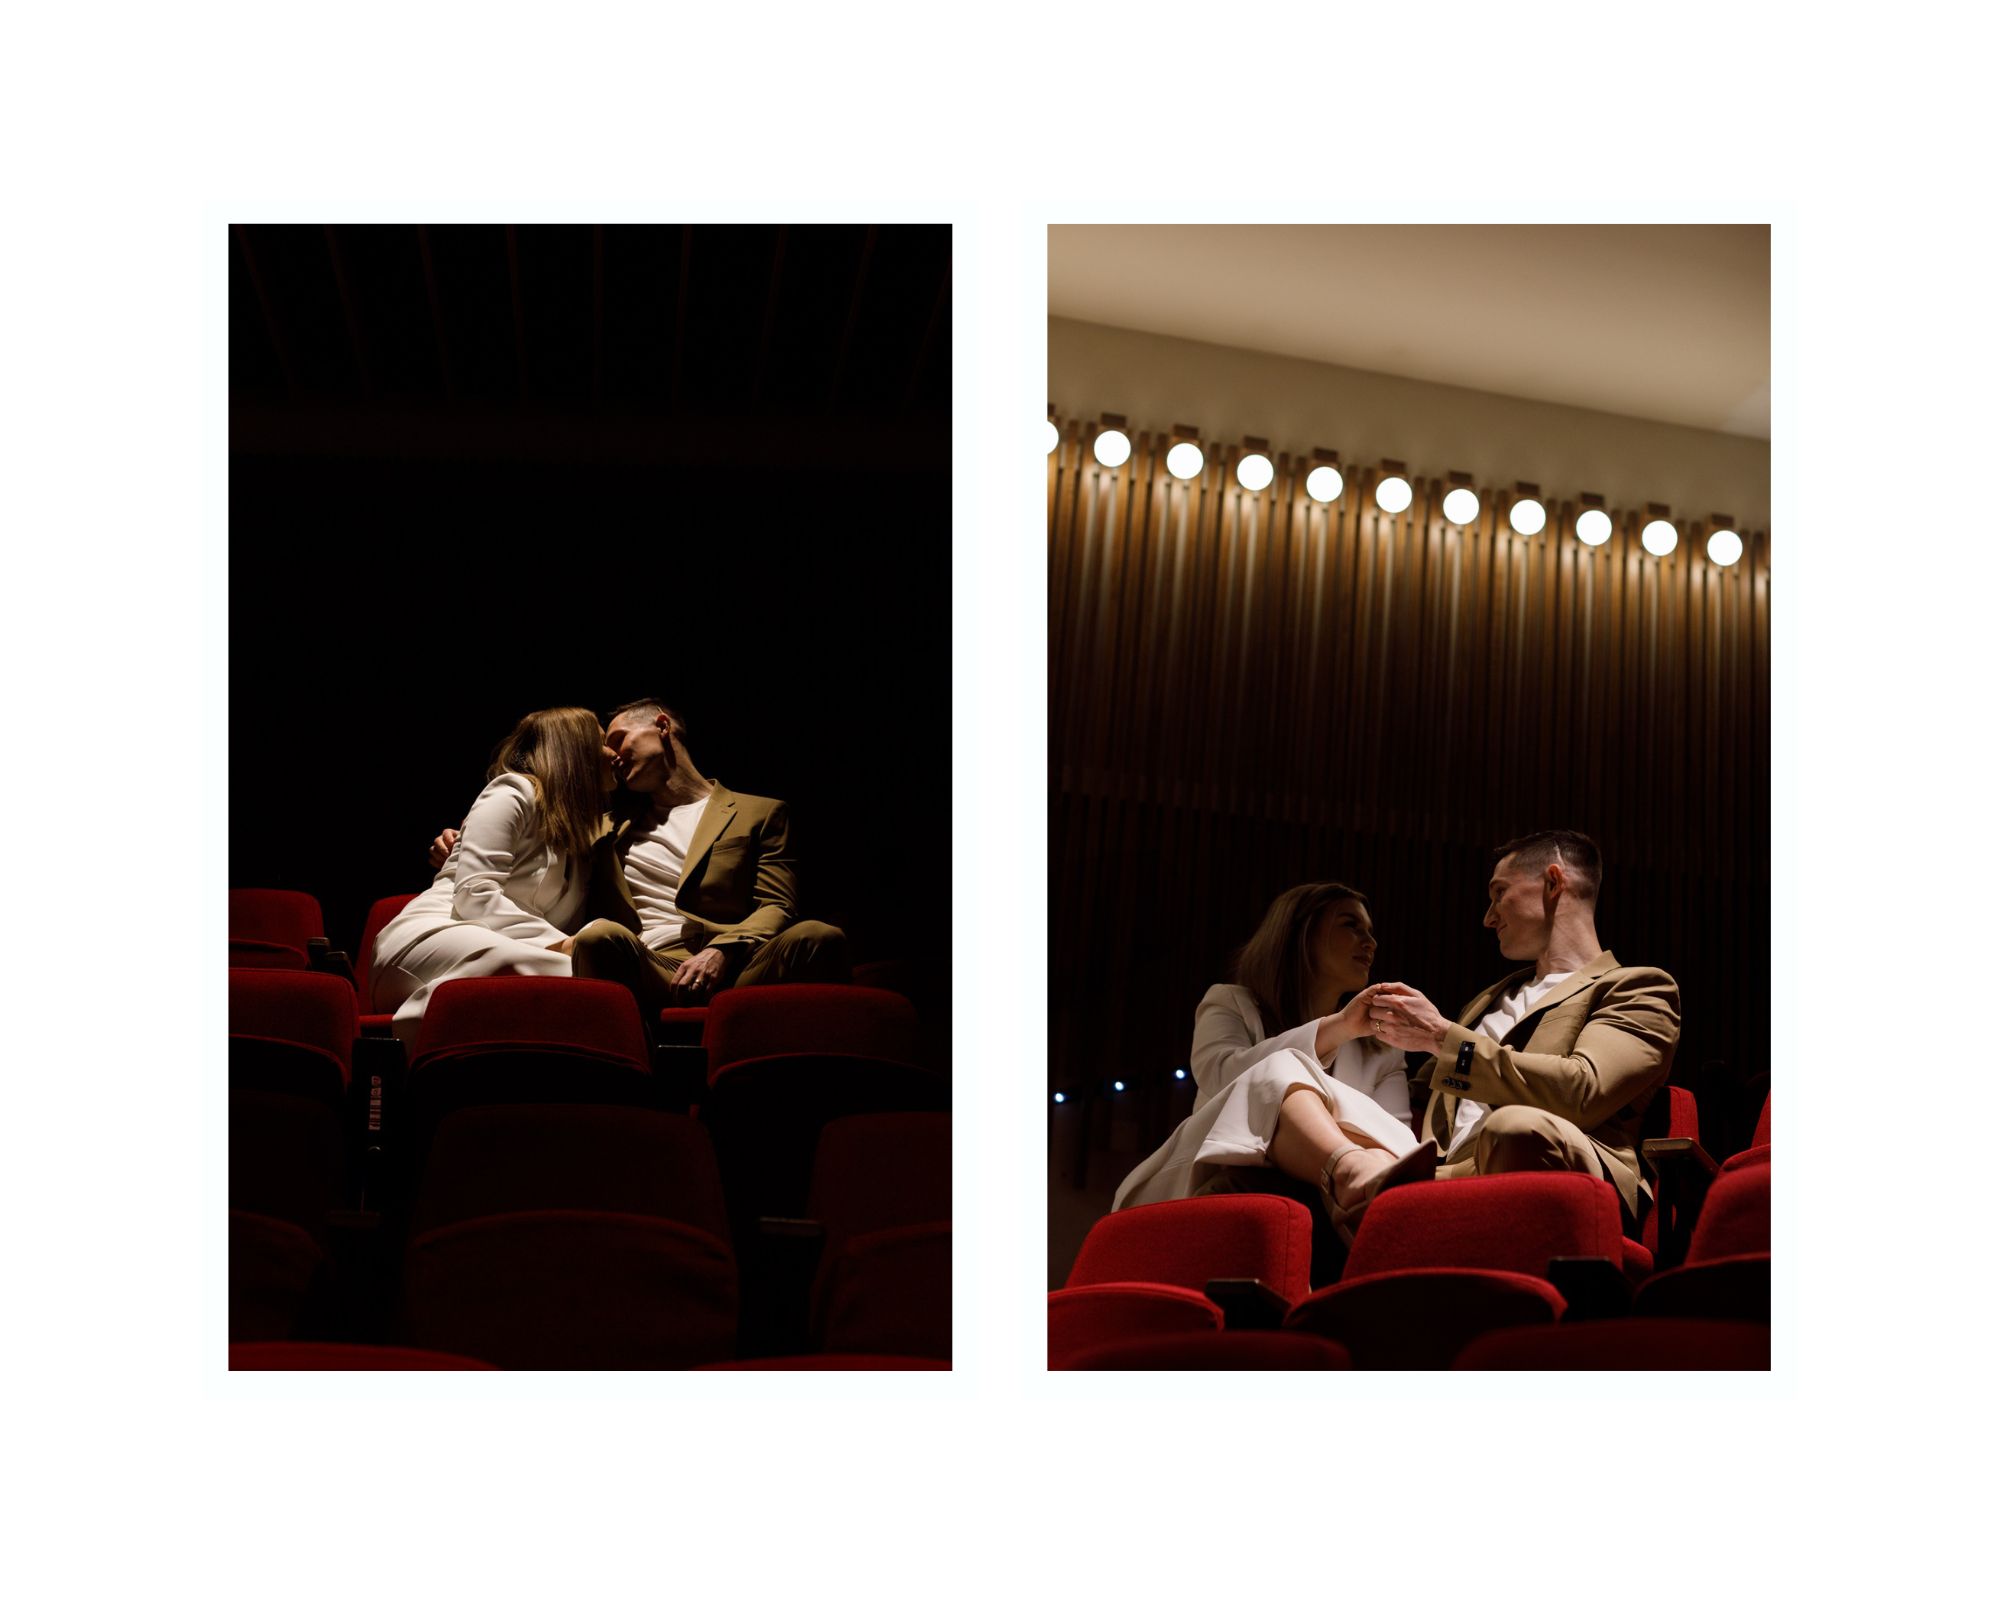 Unique art gallery engagement photos. The couple is seated in a theater surrounded by lights.